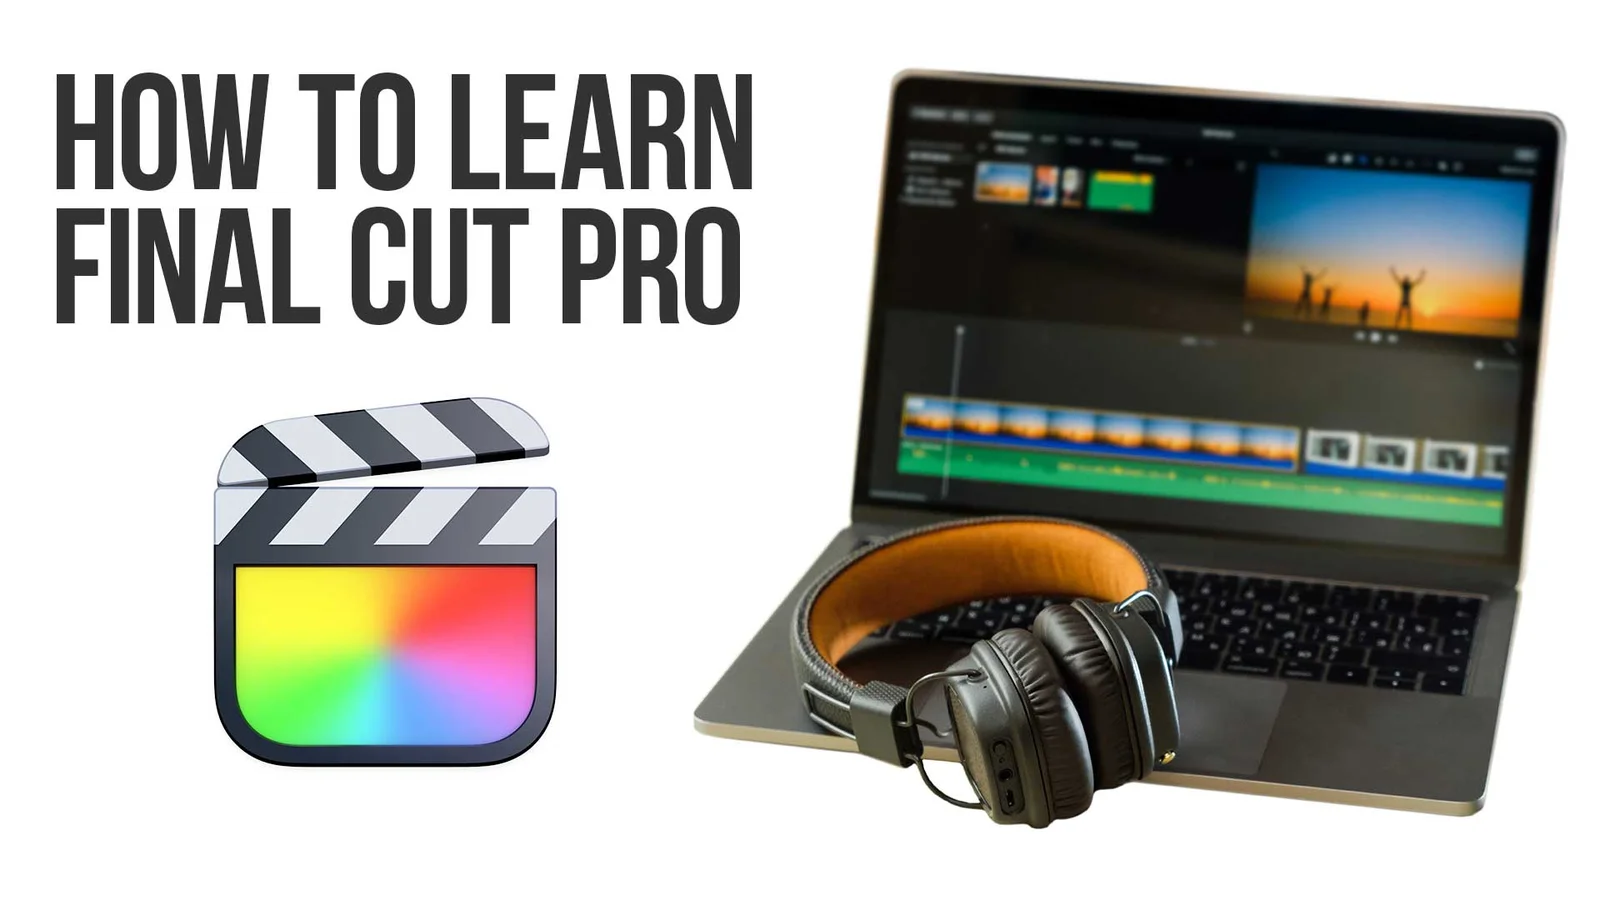 How to Learn Final Cut Pro